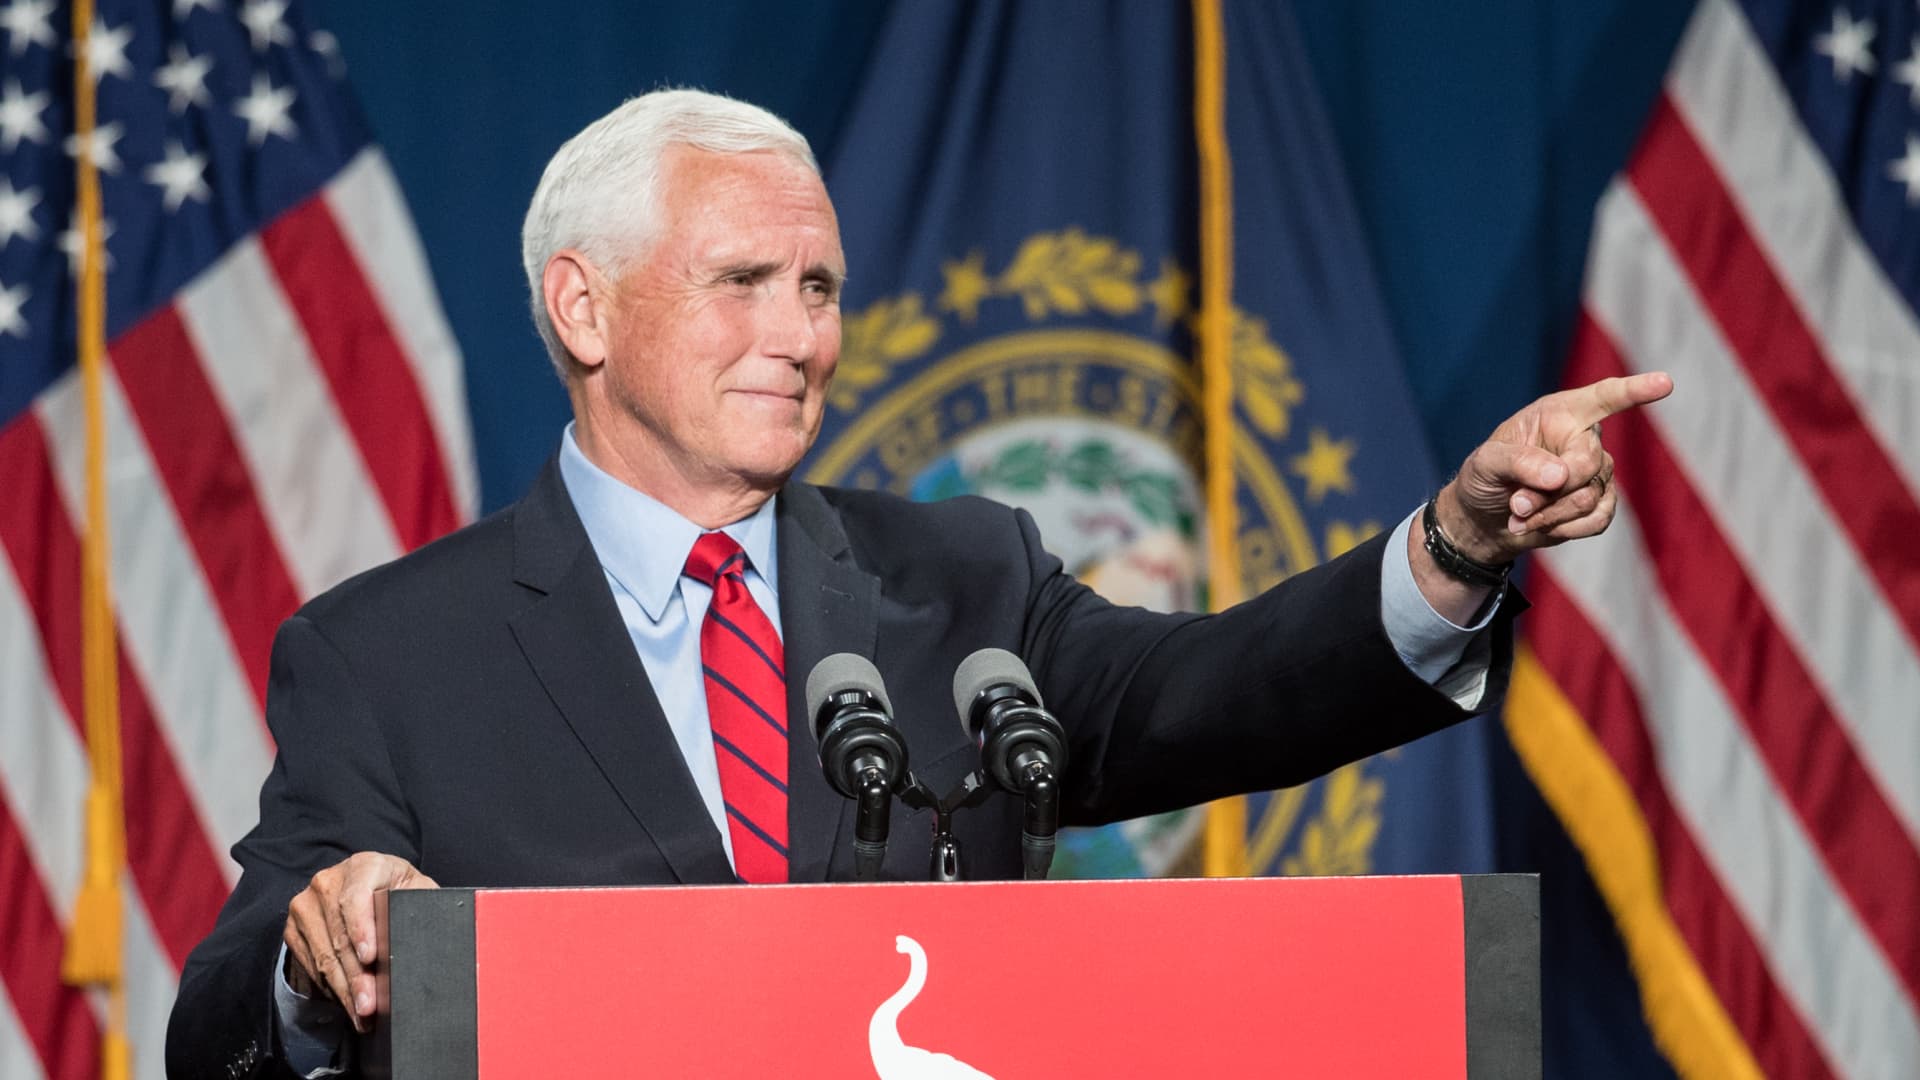 Mike Pence files paperwork to launch 2024 Republican presidential campaign